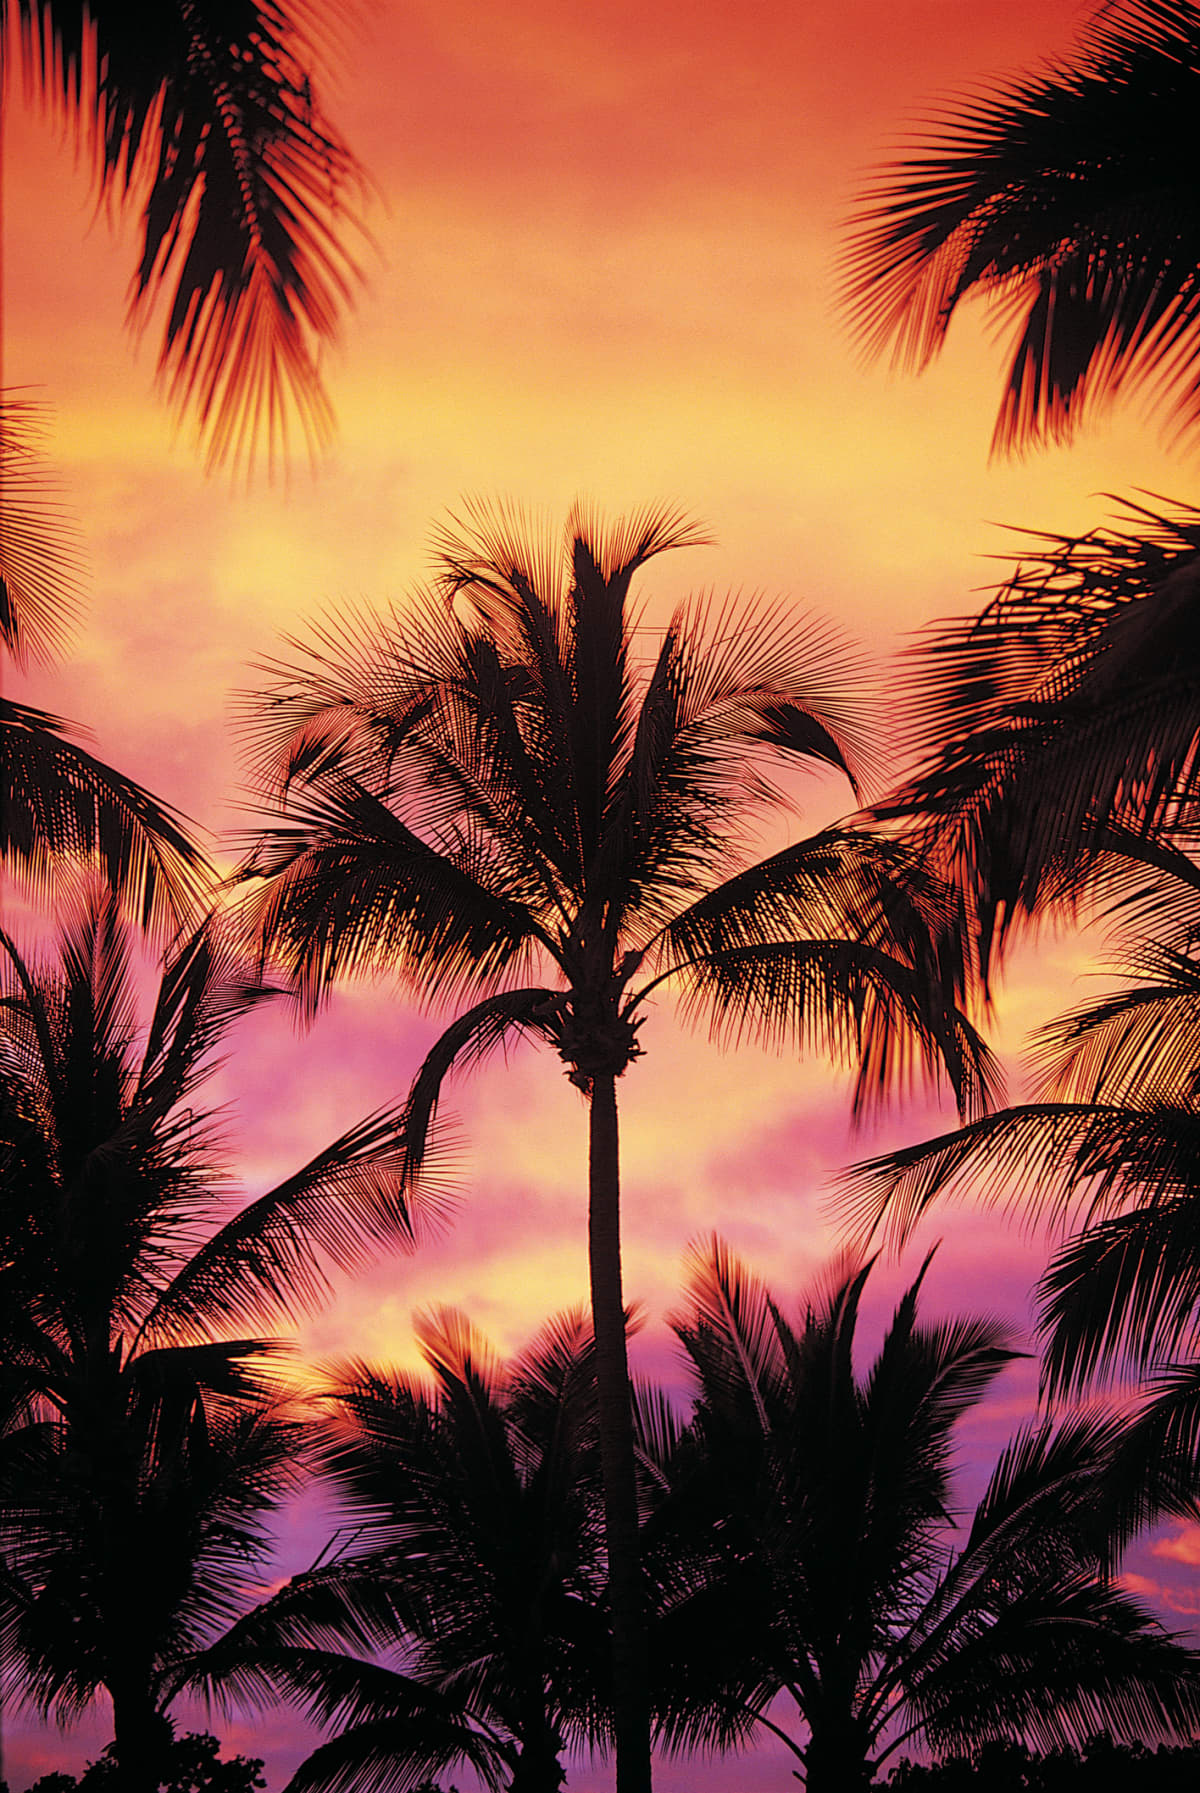 Palm trees at sunset with purple and orange skies